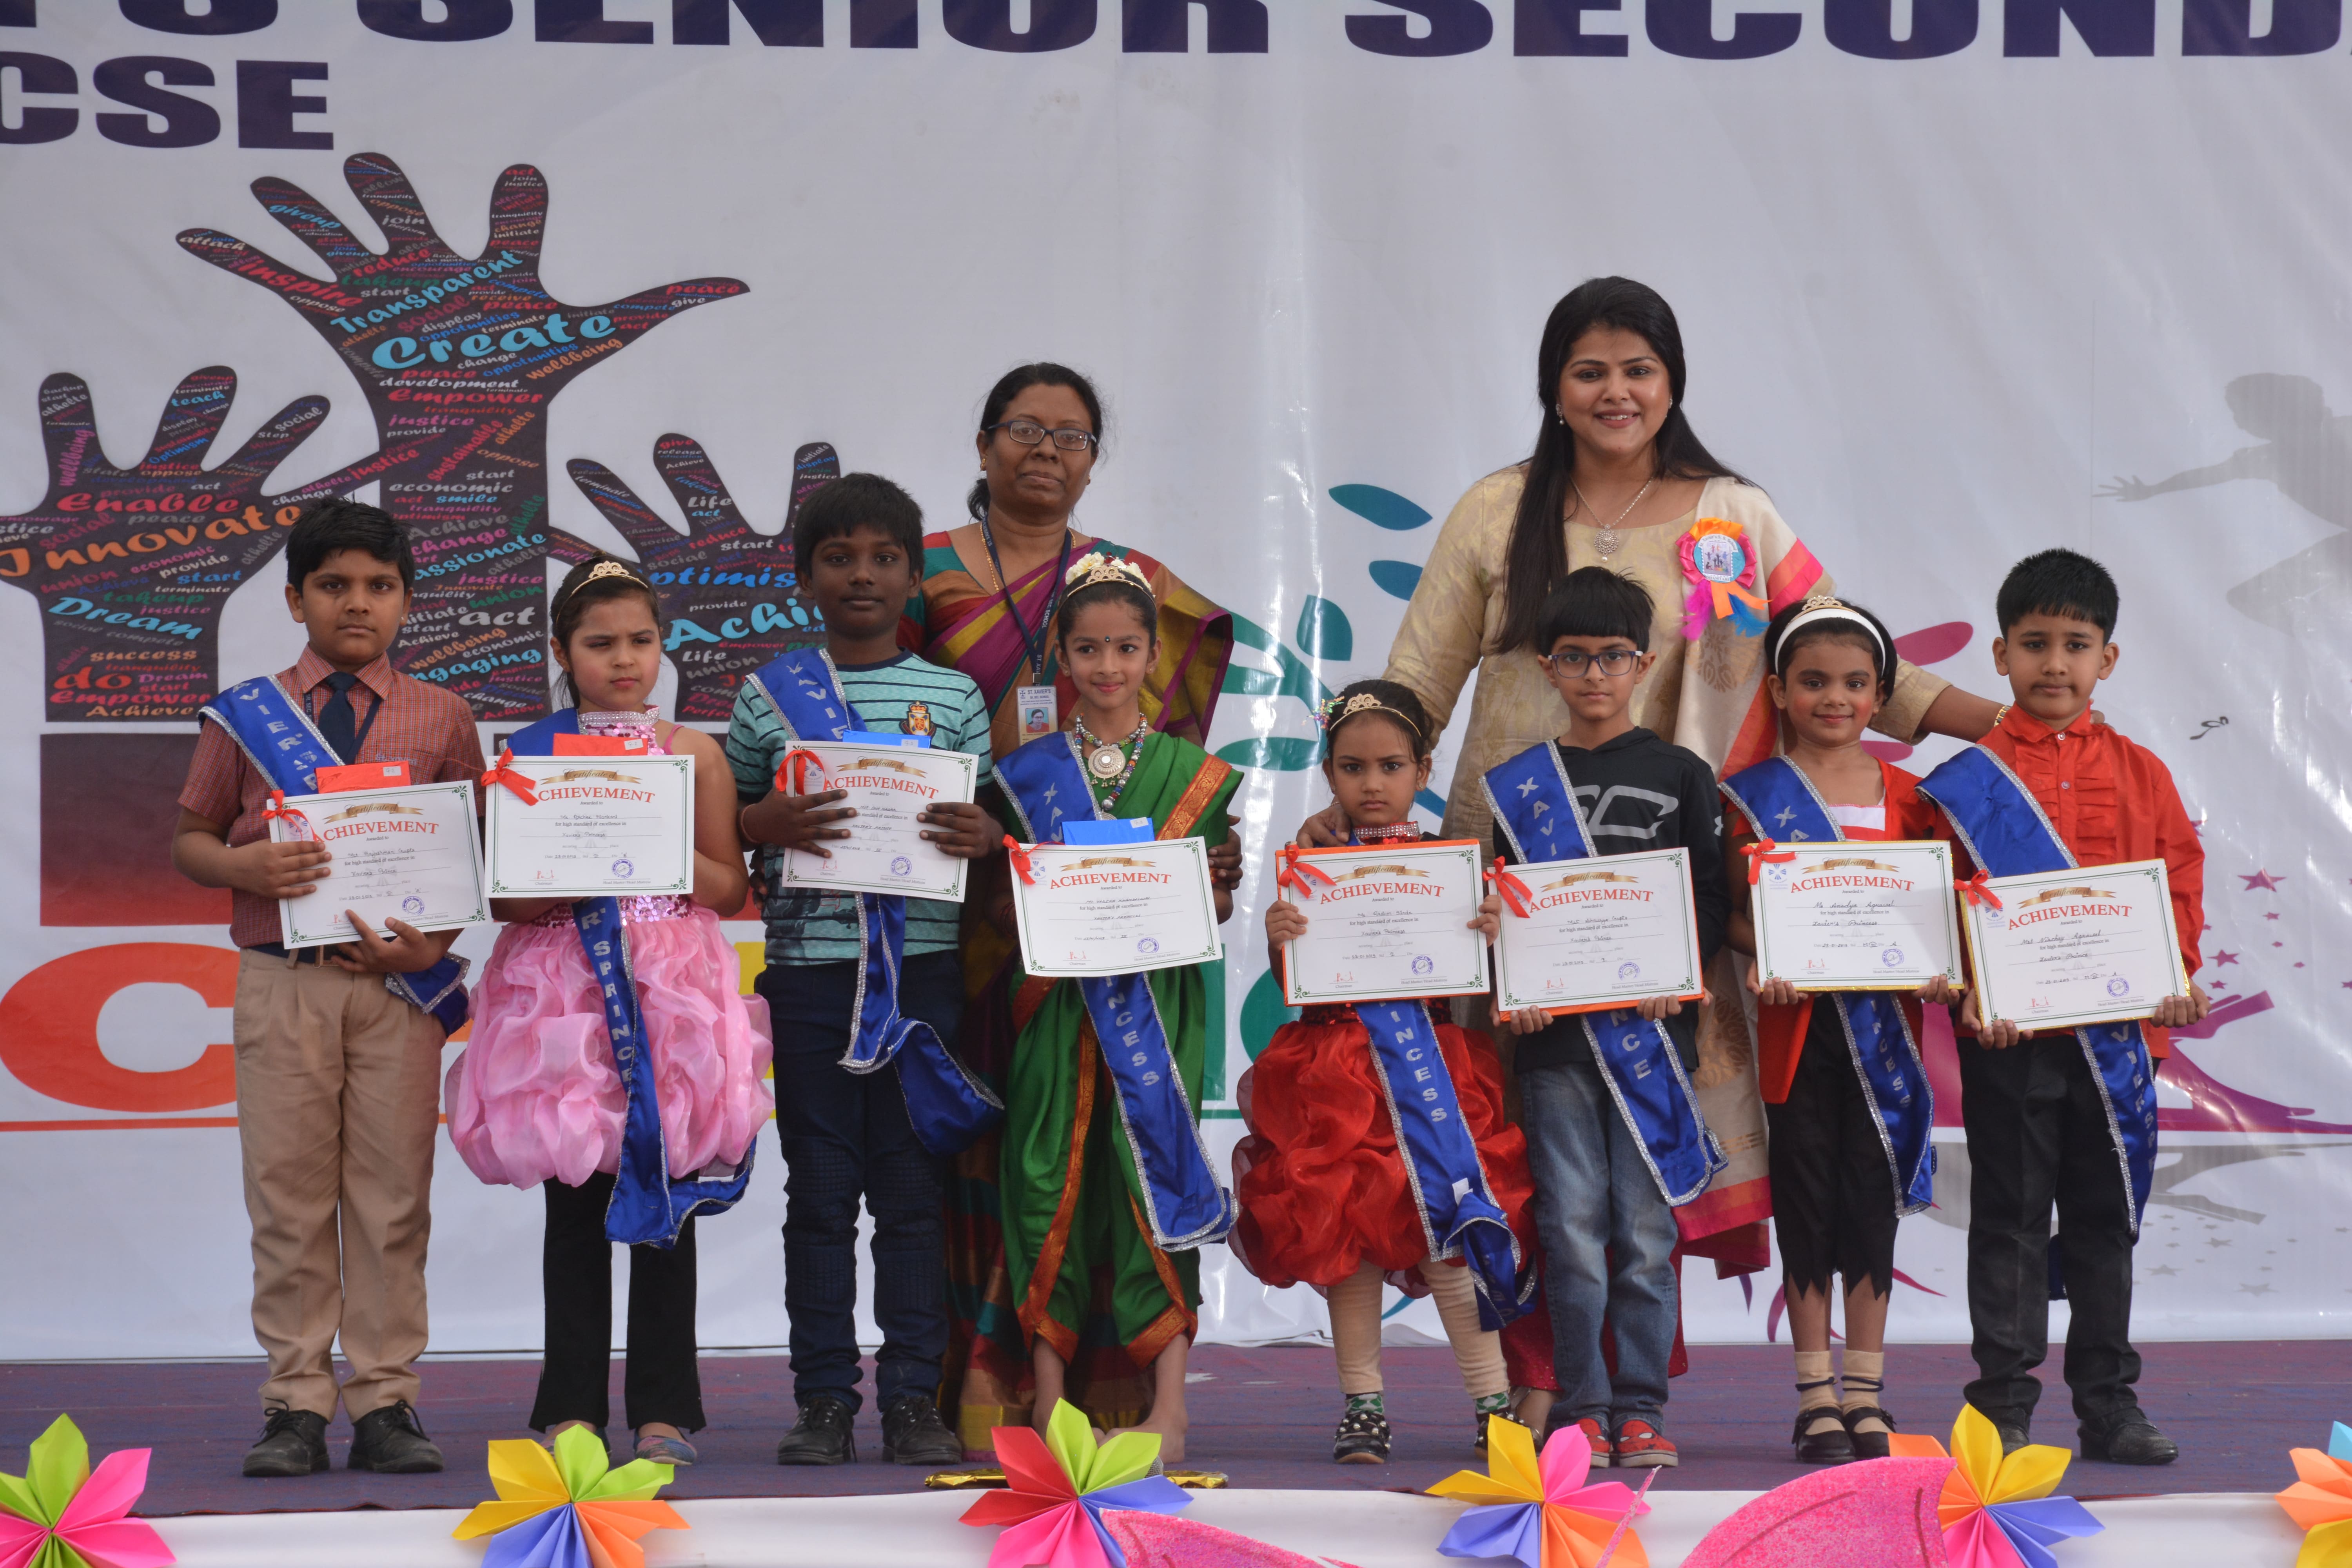 Special Assembly and Graduation Day Celebration - Ryan International School Civil Court Road, Dhamtari